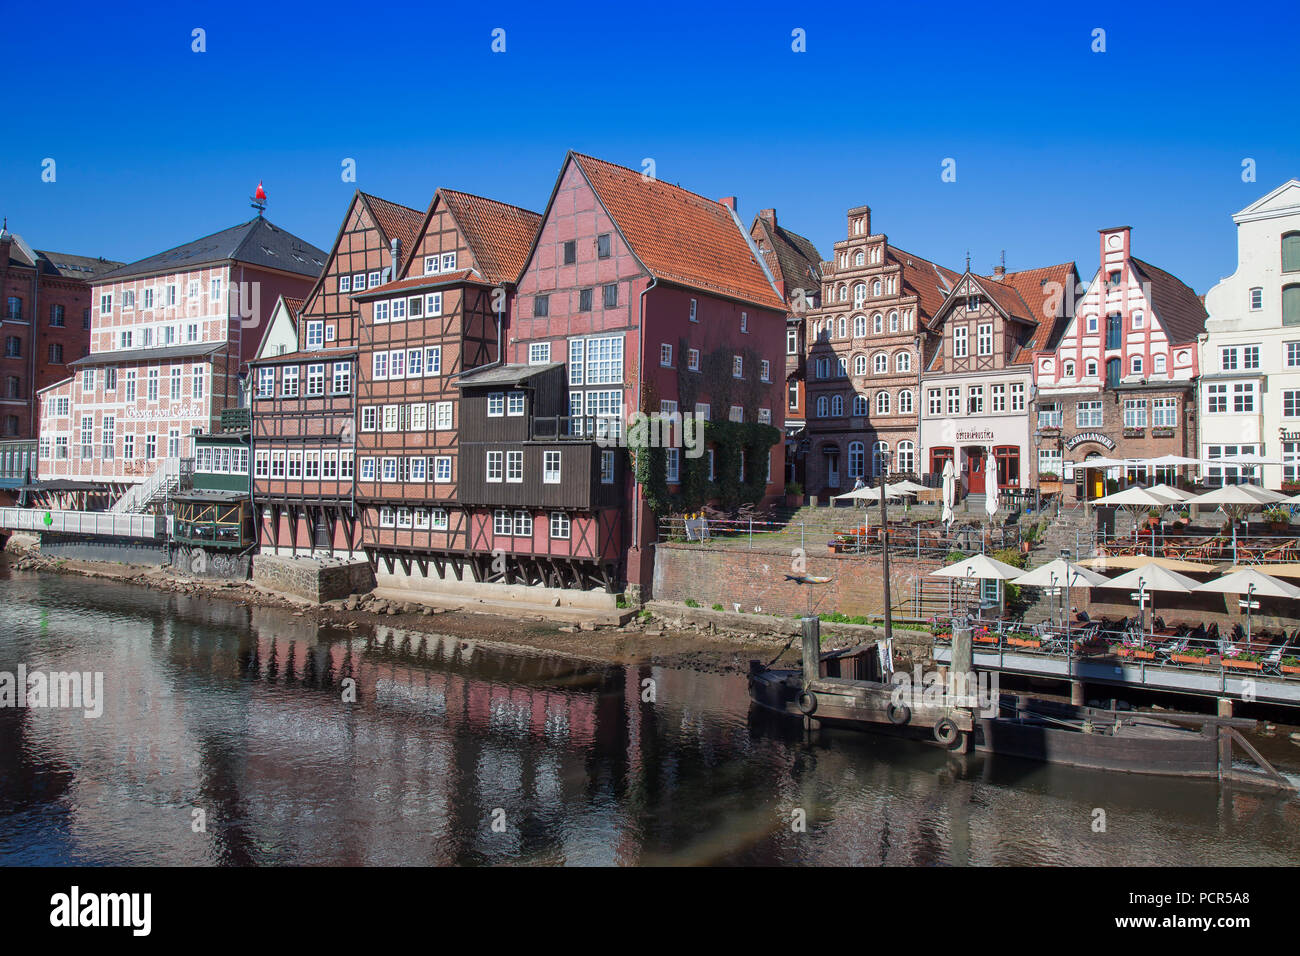 Half-timbered houses by the river Ilmenau, old town, Lüneburg, Germany Stock Photo